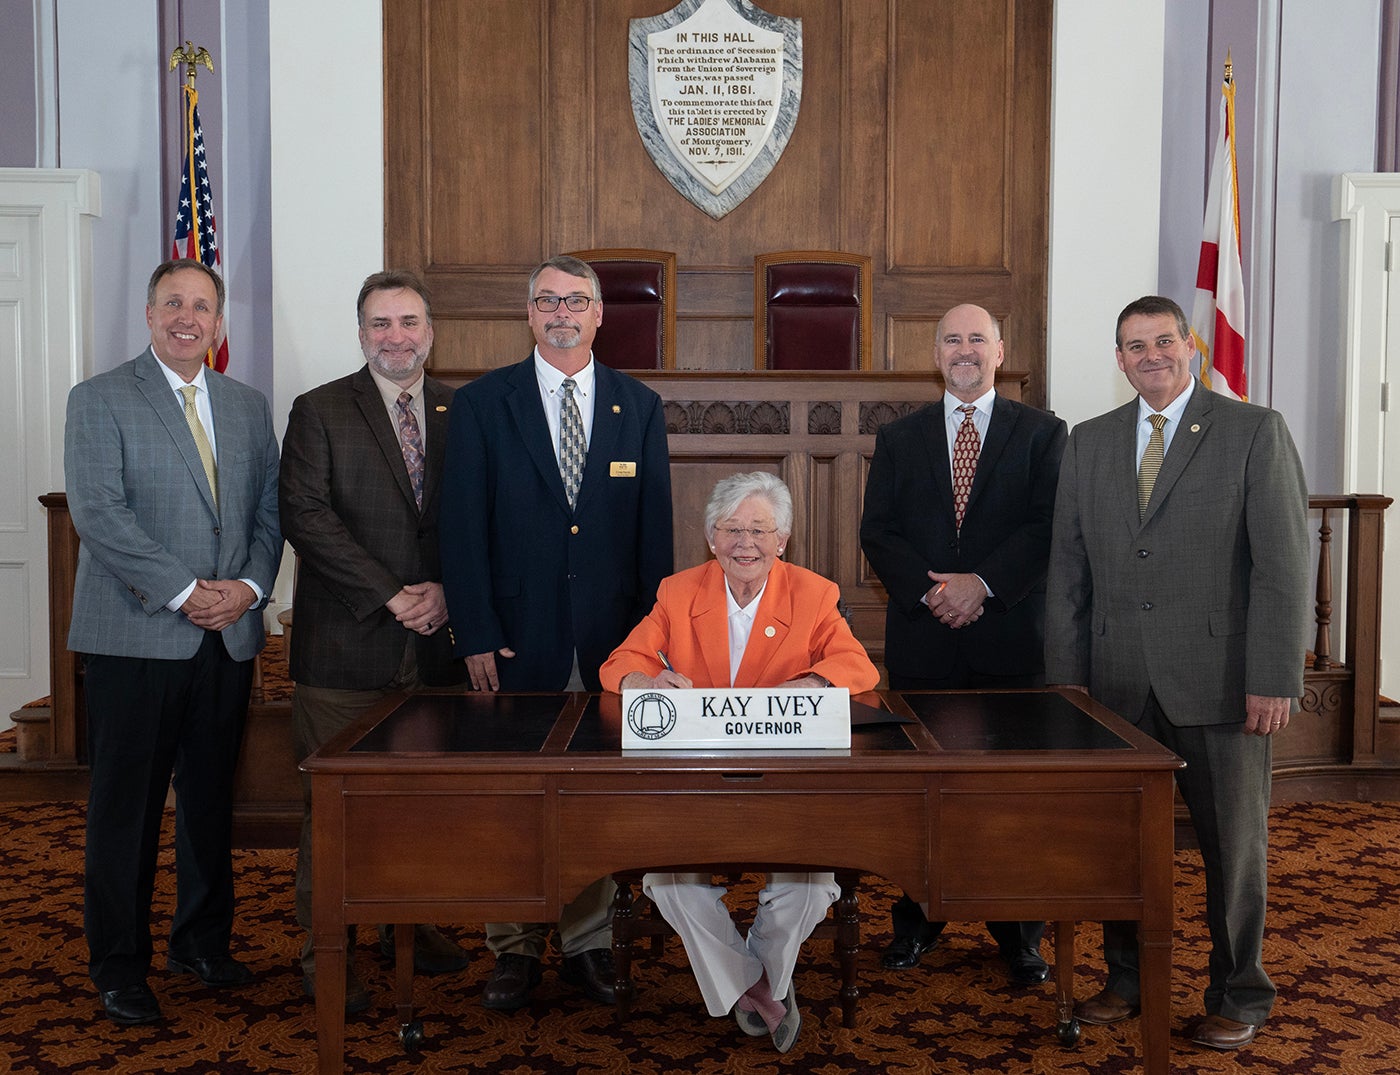 Governor Ivey Highlights Contributions of NWTF During its 50th Anniversary